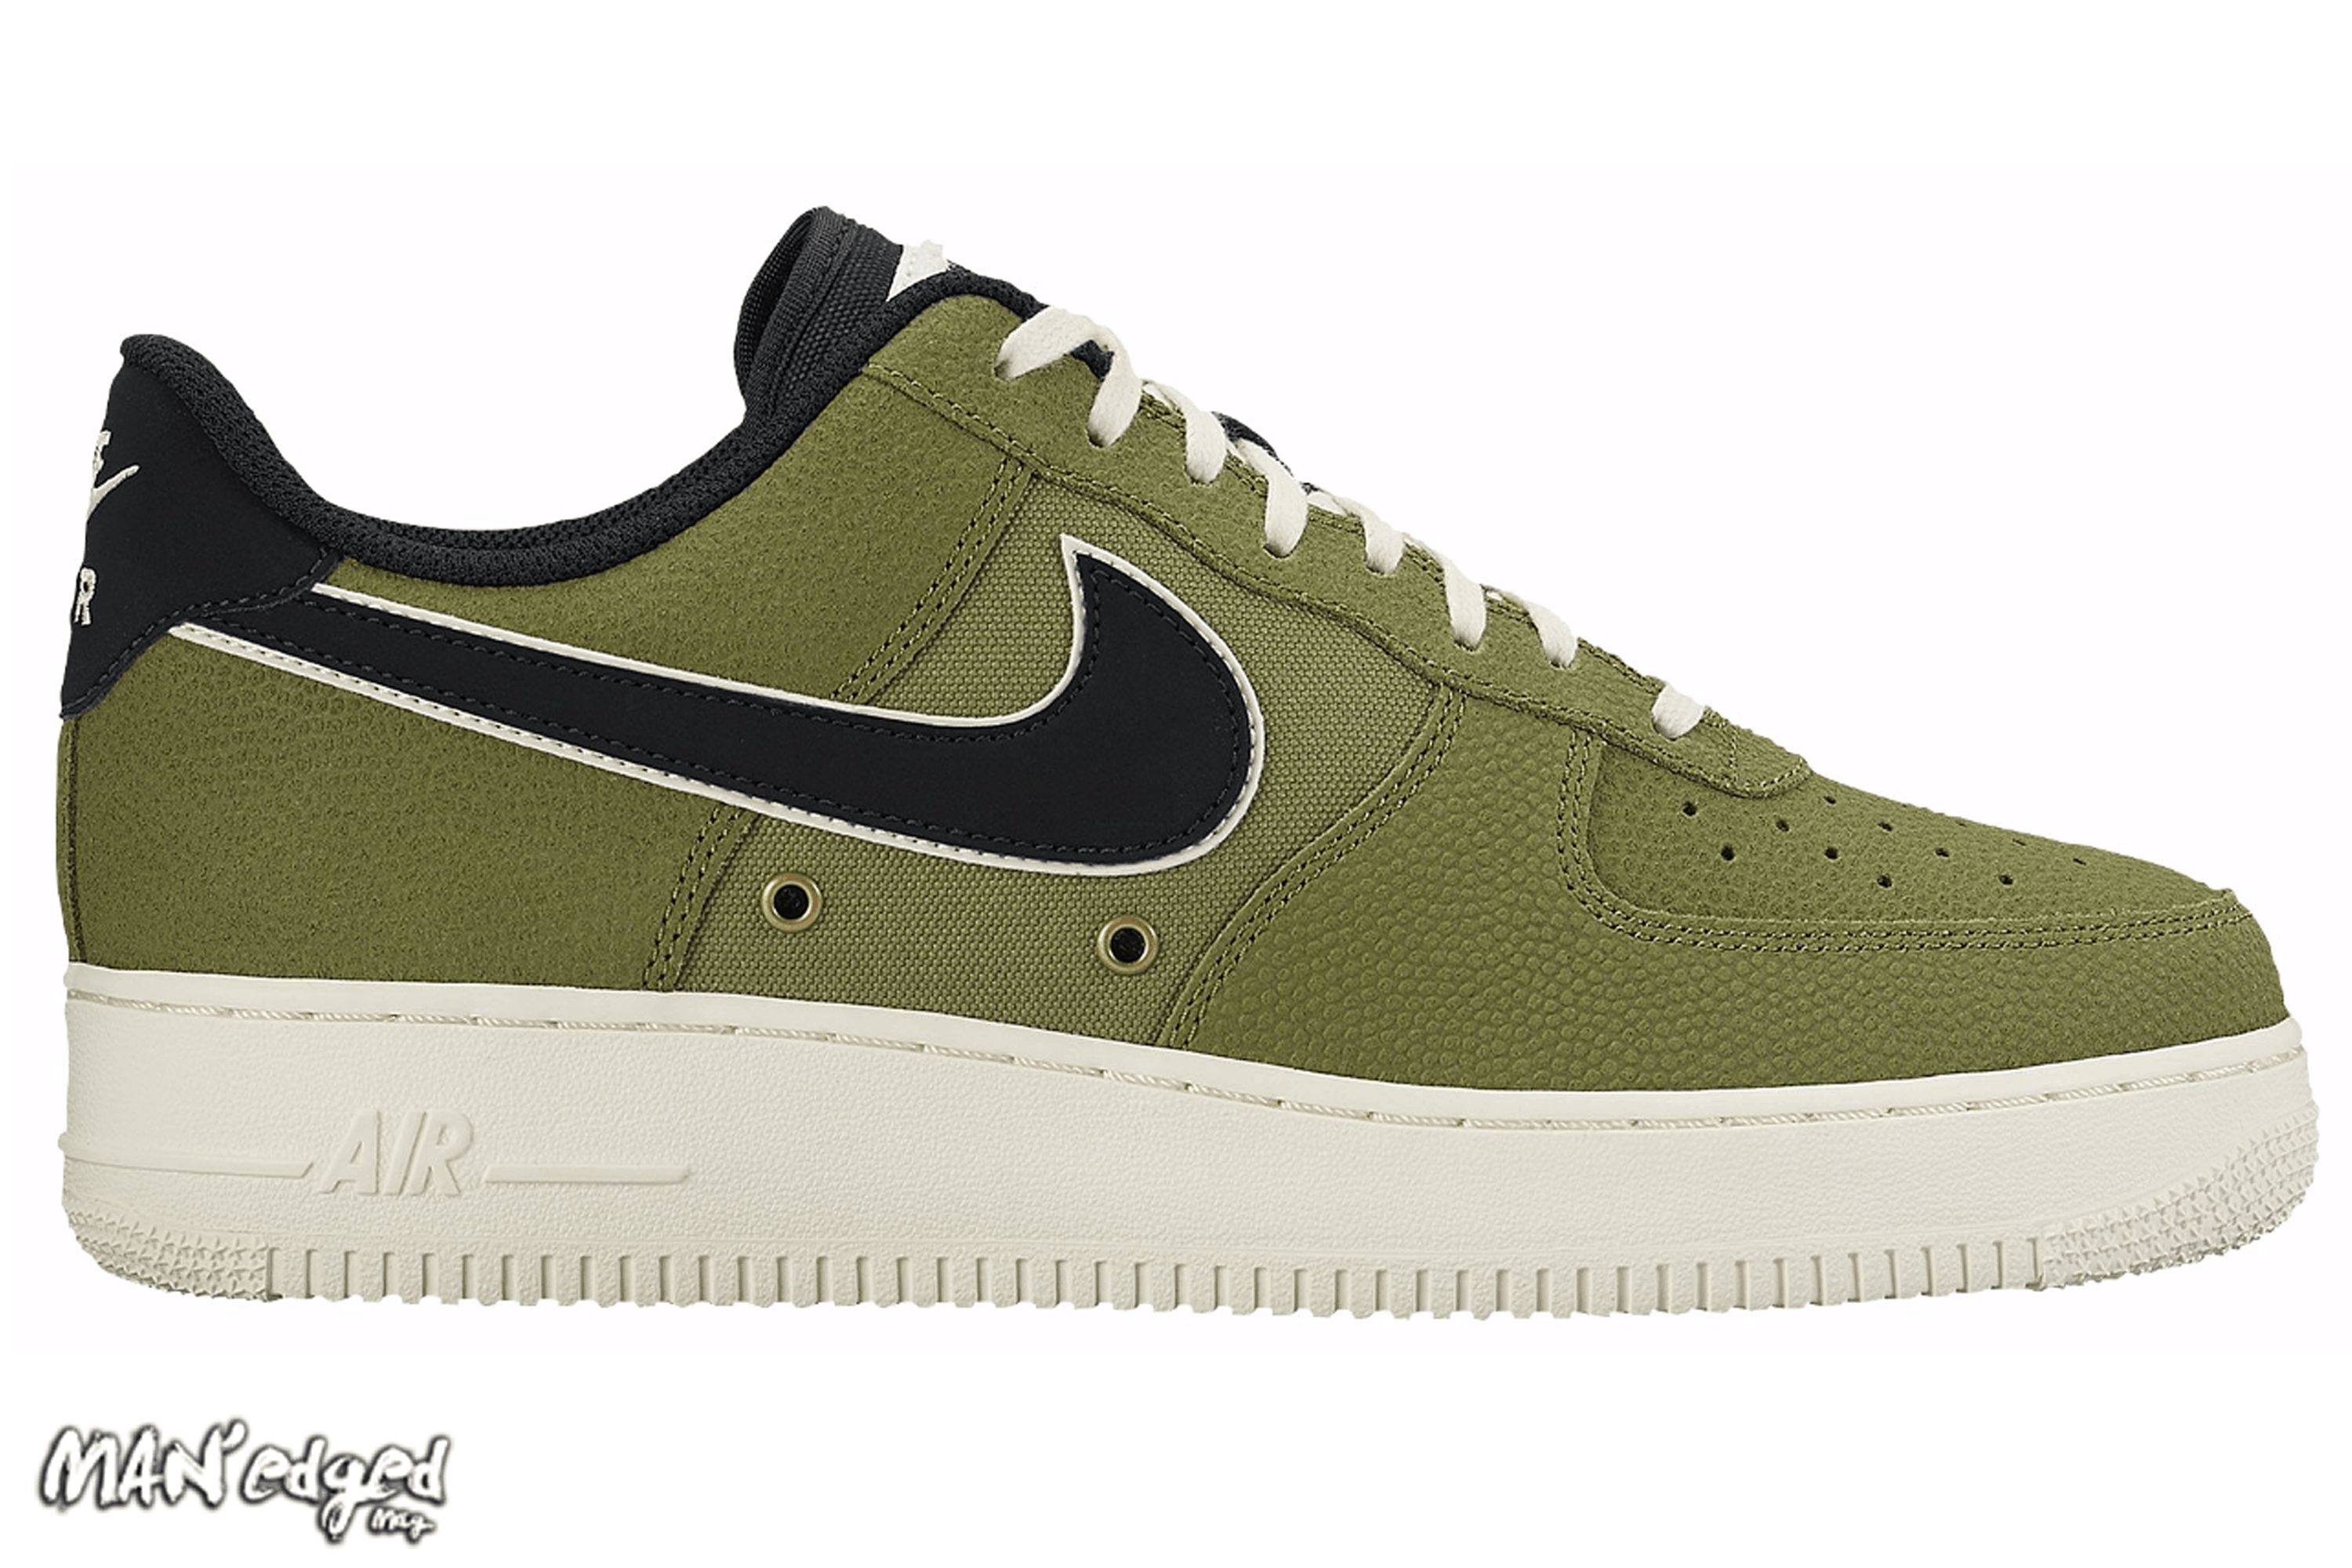 Green men's Nike Air Force one shoe, featured in MAN'edged Magazine St Patricks Day men's style round up